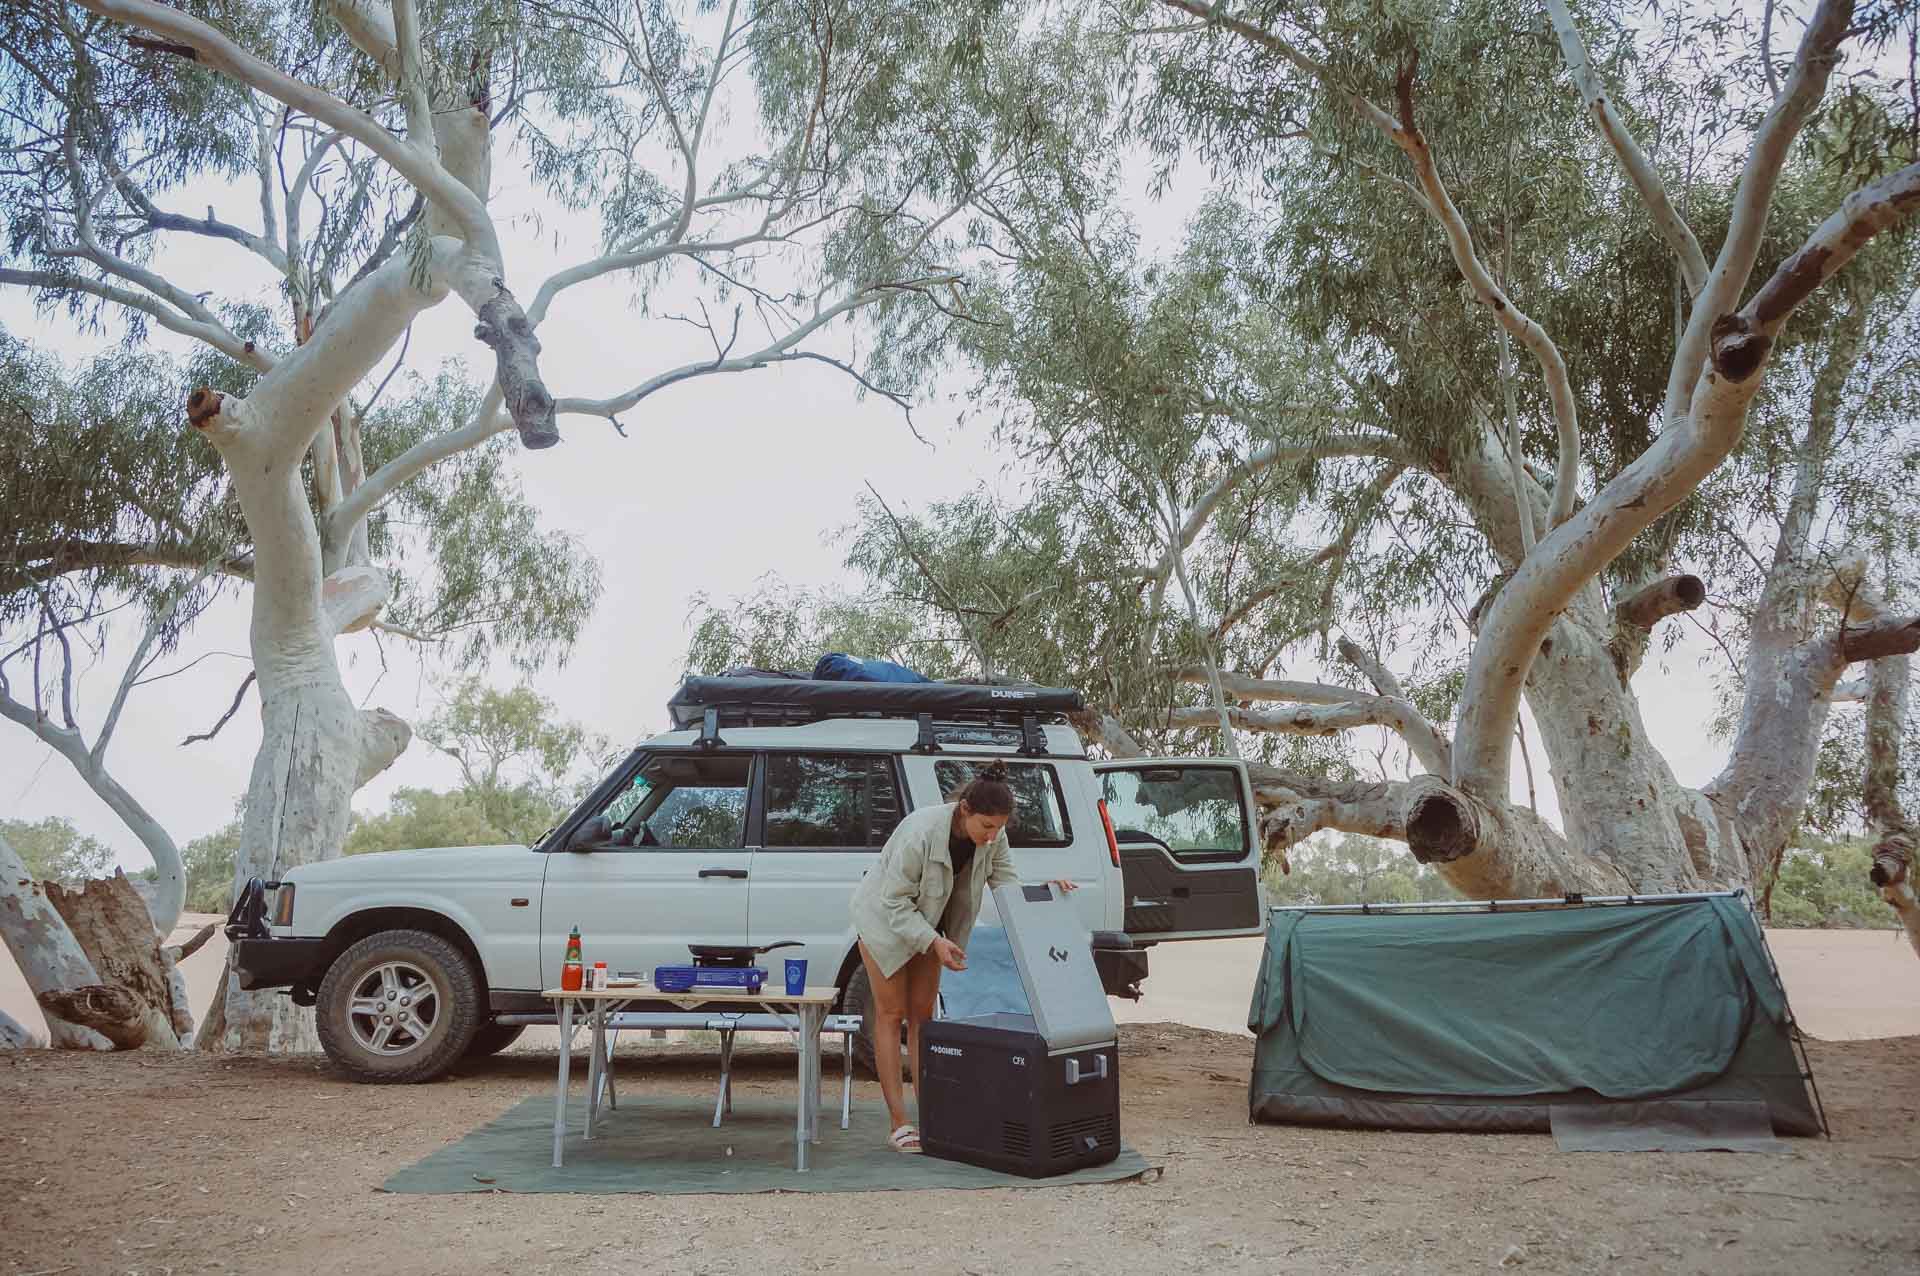 How a Dometic Fridge/Freezer Will Take Your Camping Set Up to the Next Level, gear, dometic, camping, camp cooking, lady going through dometic fridge while camping with a swag and 4WD